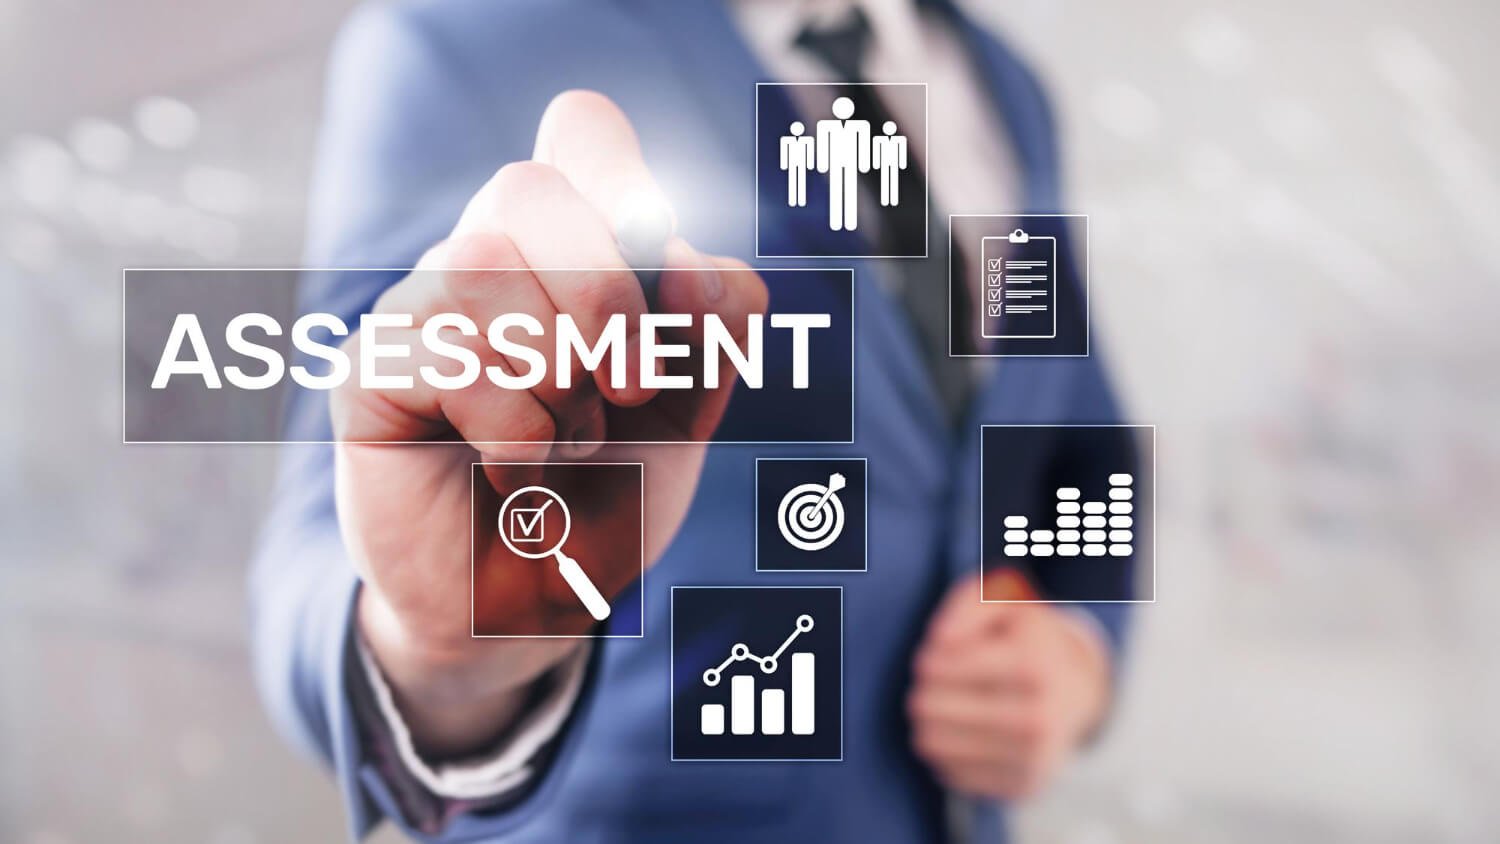 What Does Assessment Active Mean at Walmart?